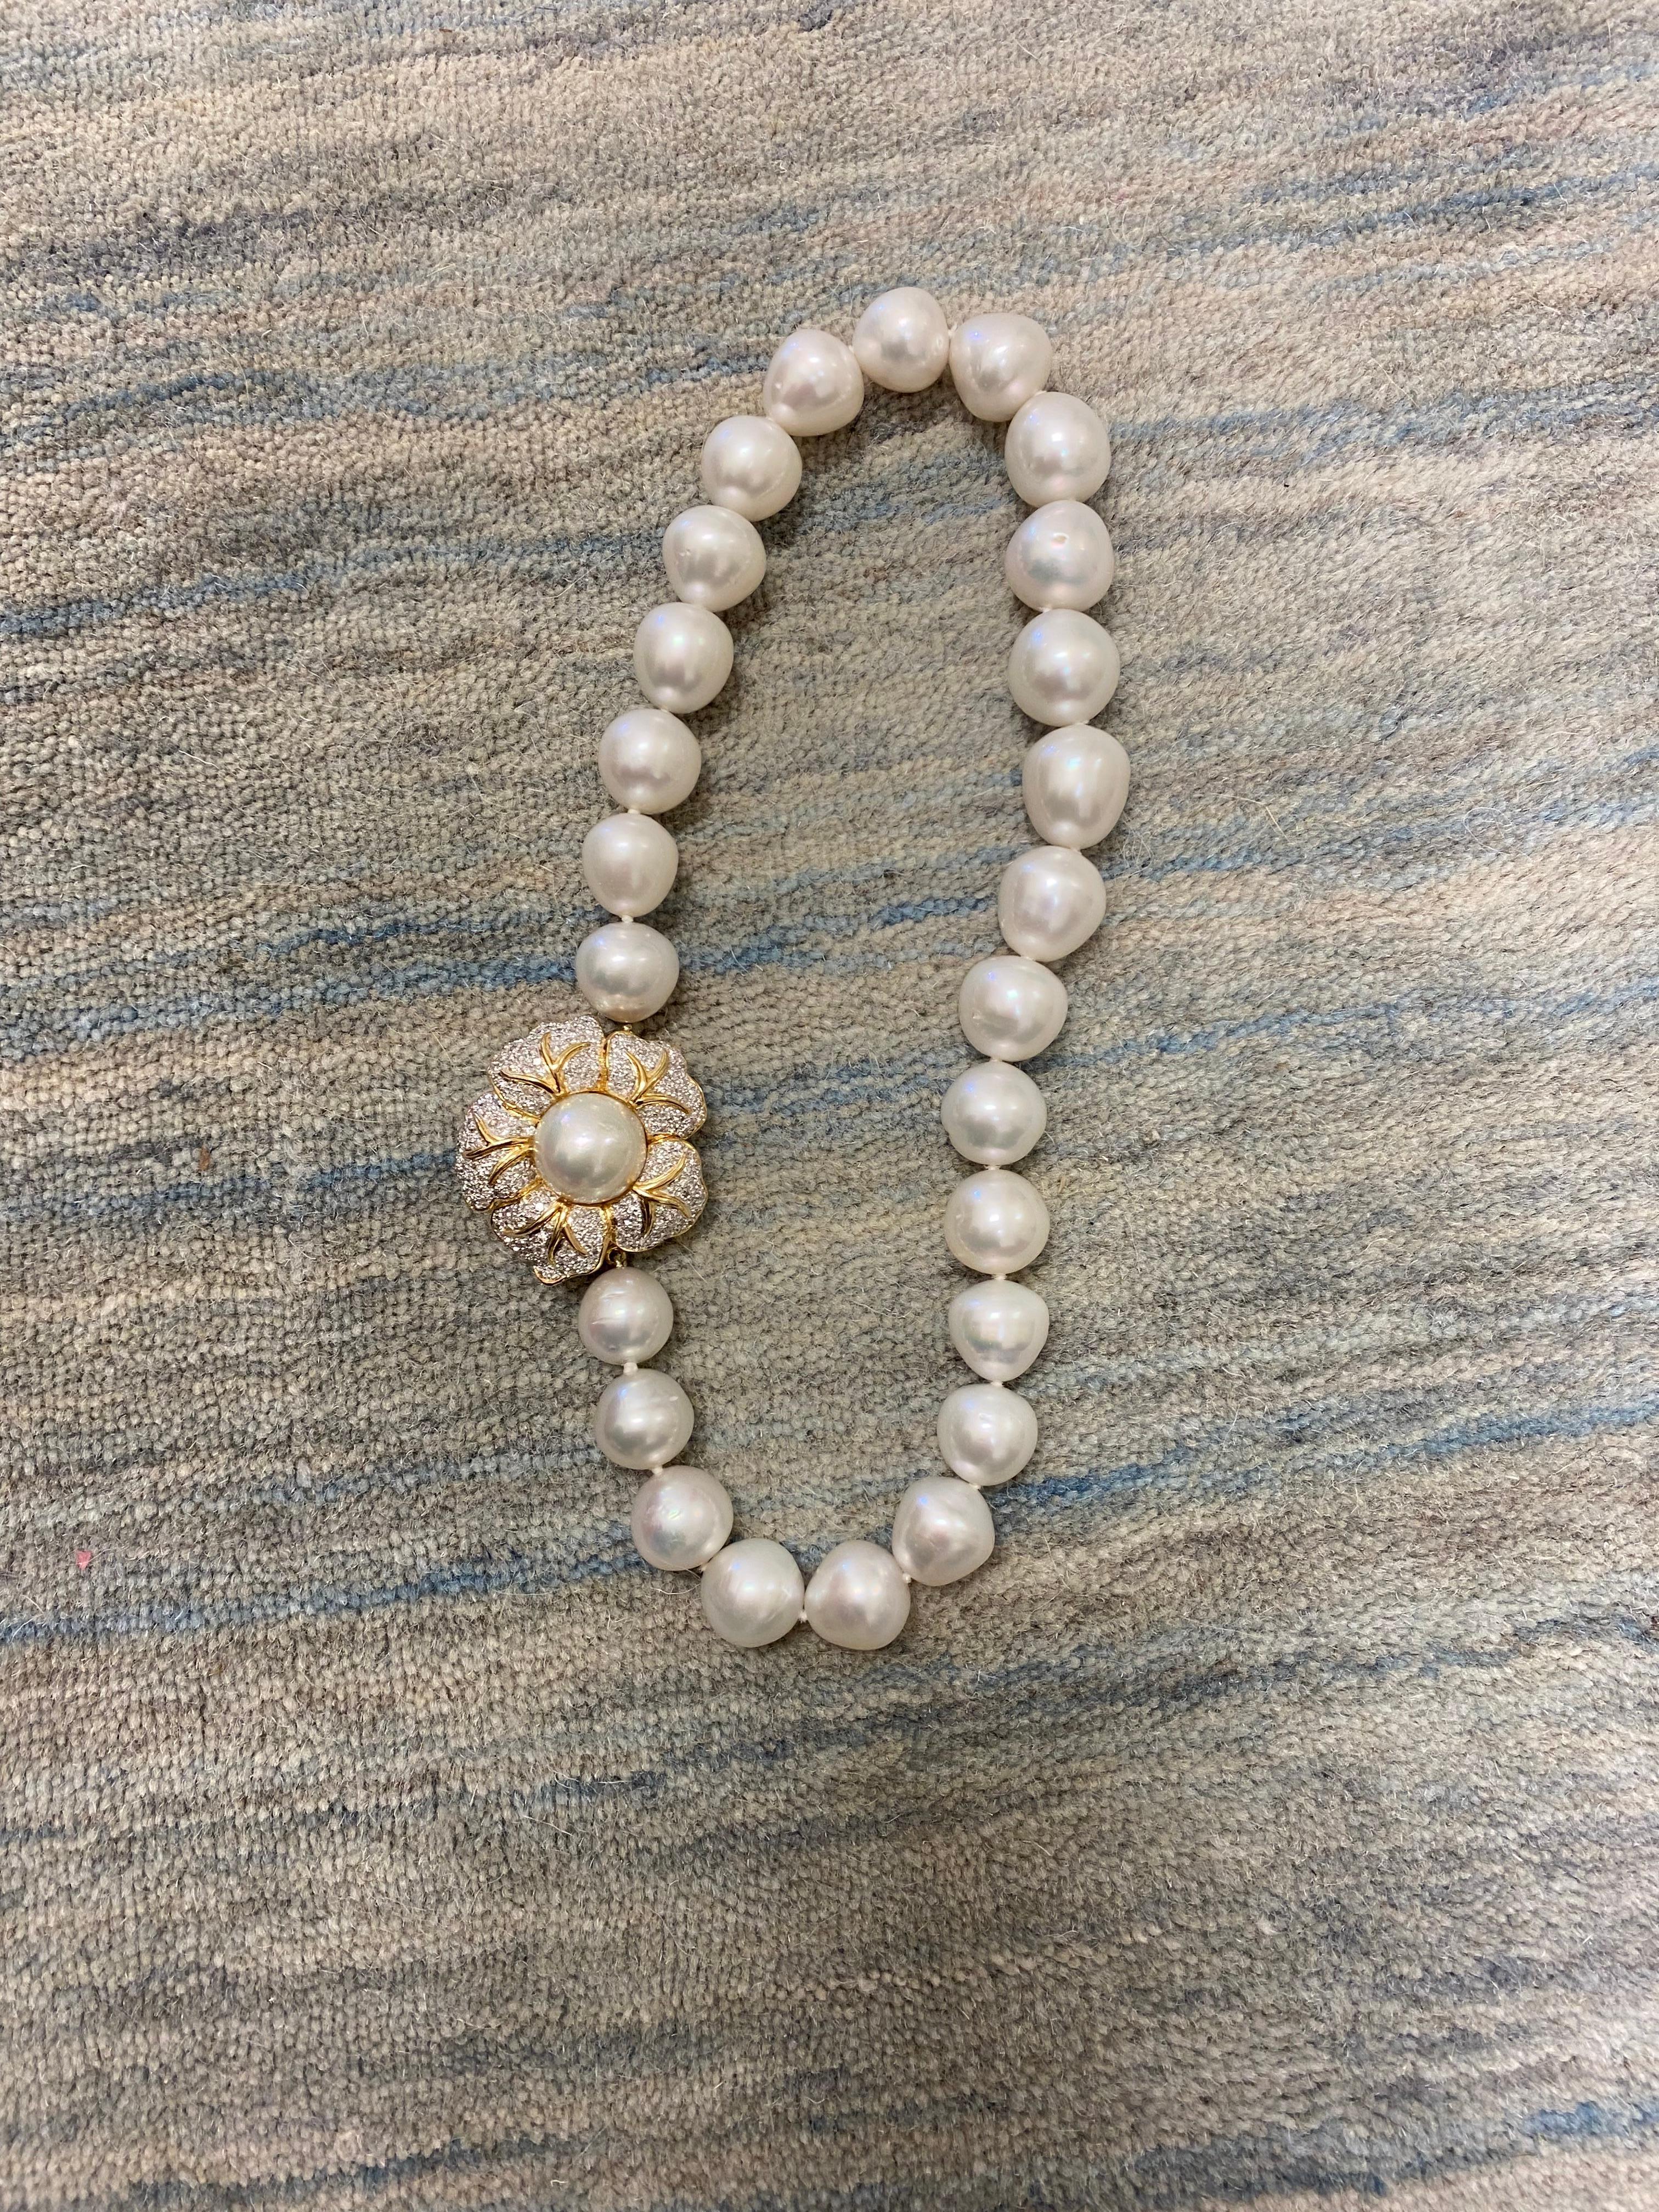 Gorgeous 14kt Yellow gold Floral Clasp/Enhancer.  This stunning clasp priced with The South Sea Pearl necklace shown here.  The clasp is made to interchange with the other clasp.  There is a second clasp also shown, that can be purchased